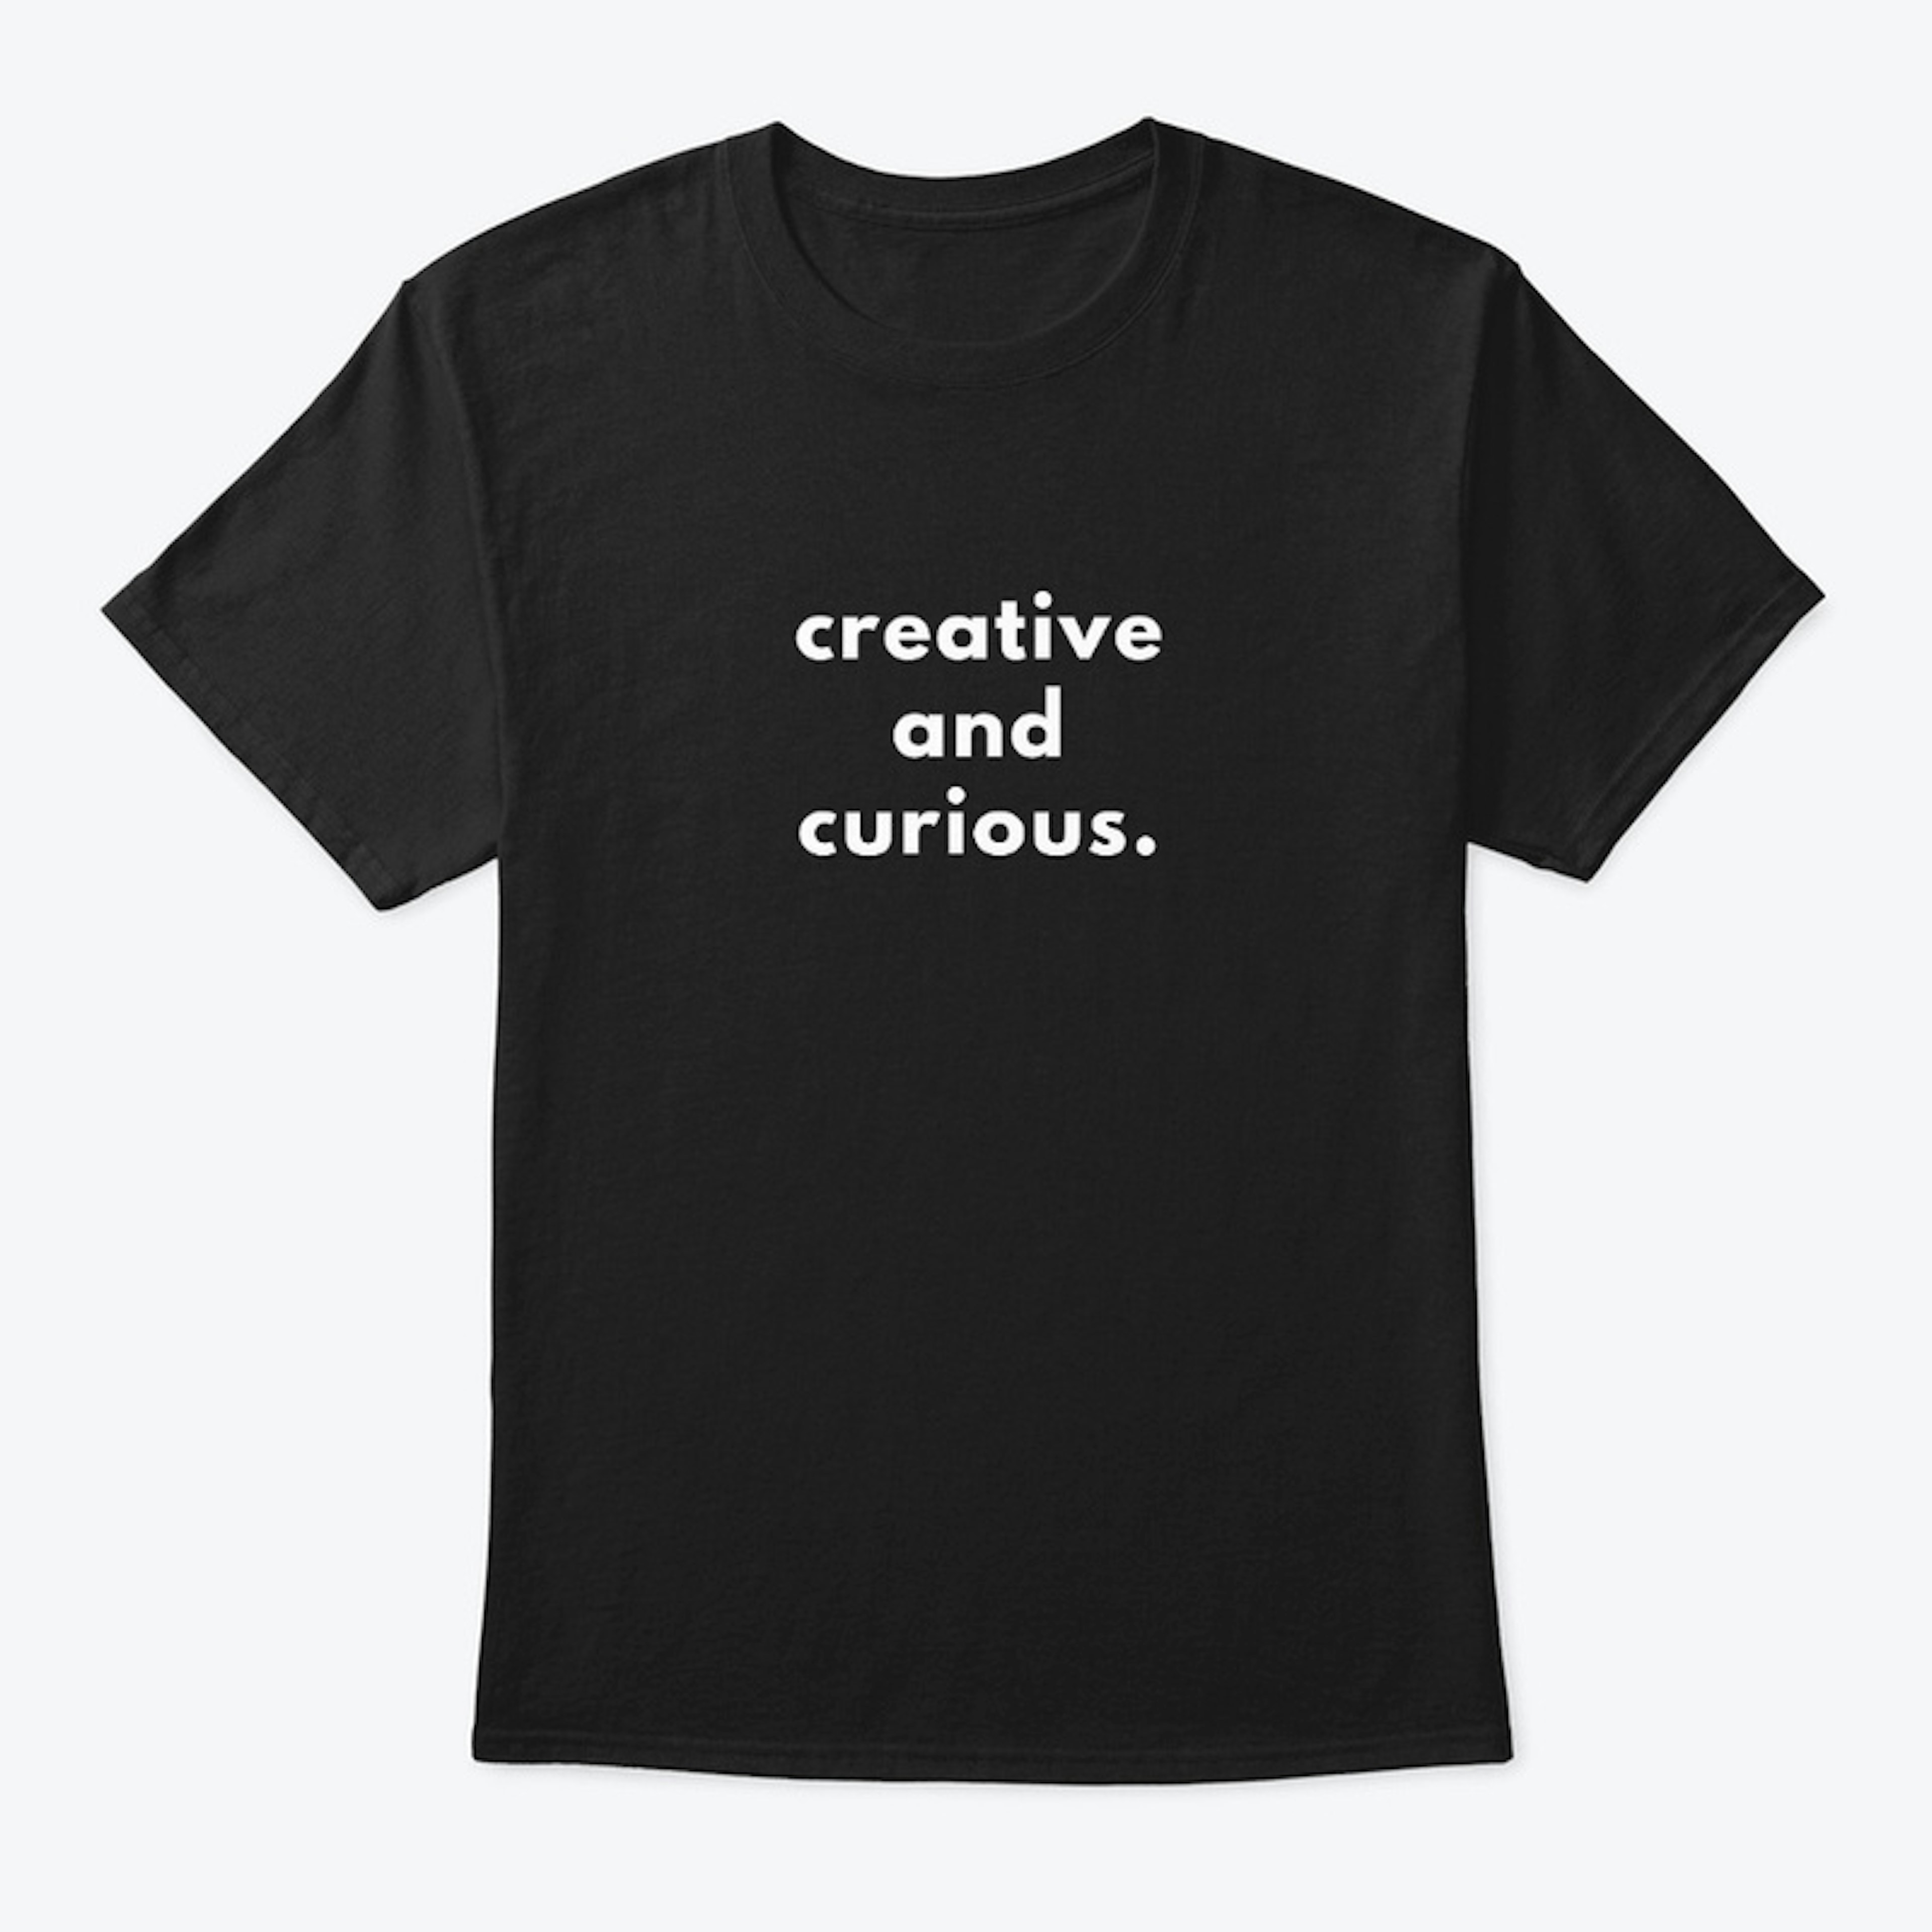 creative and curious